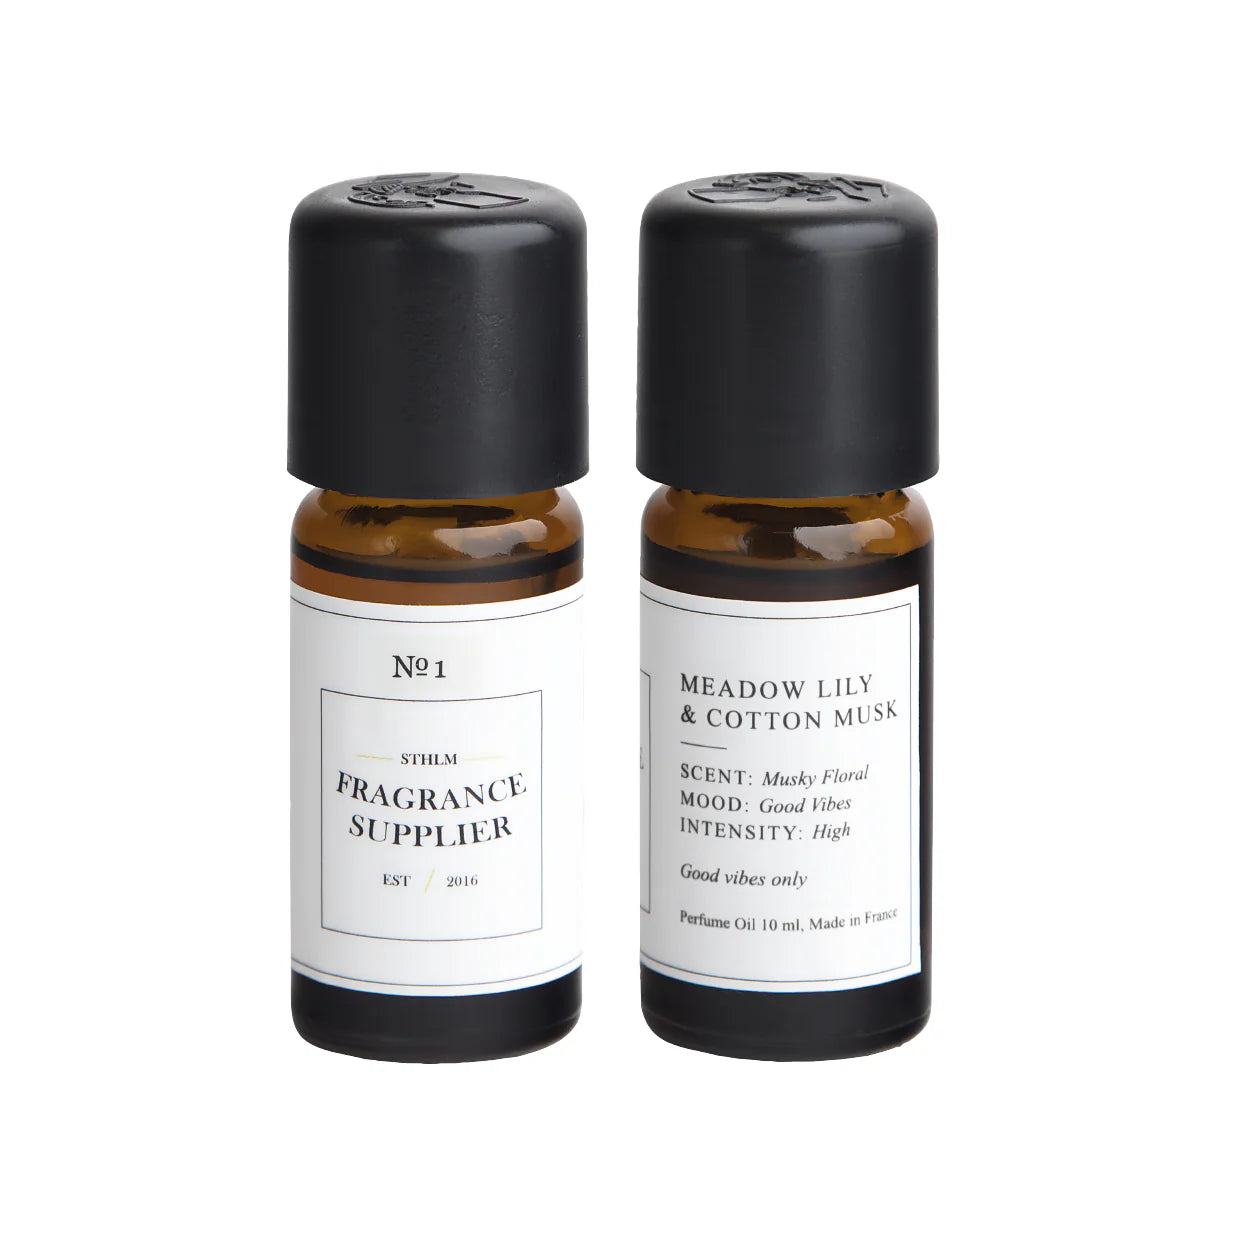 No 1 Meadow Lily & Cotton Musk - 10 ml.